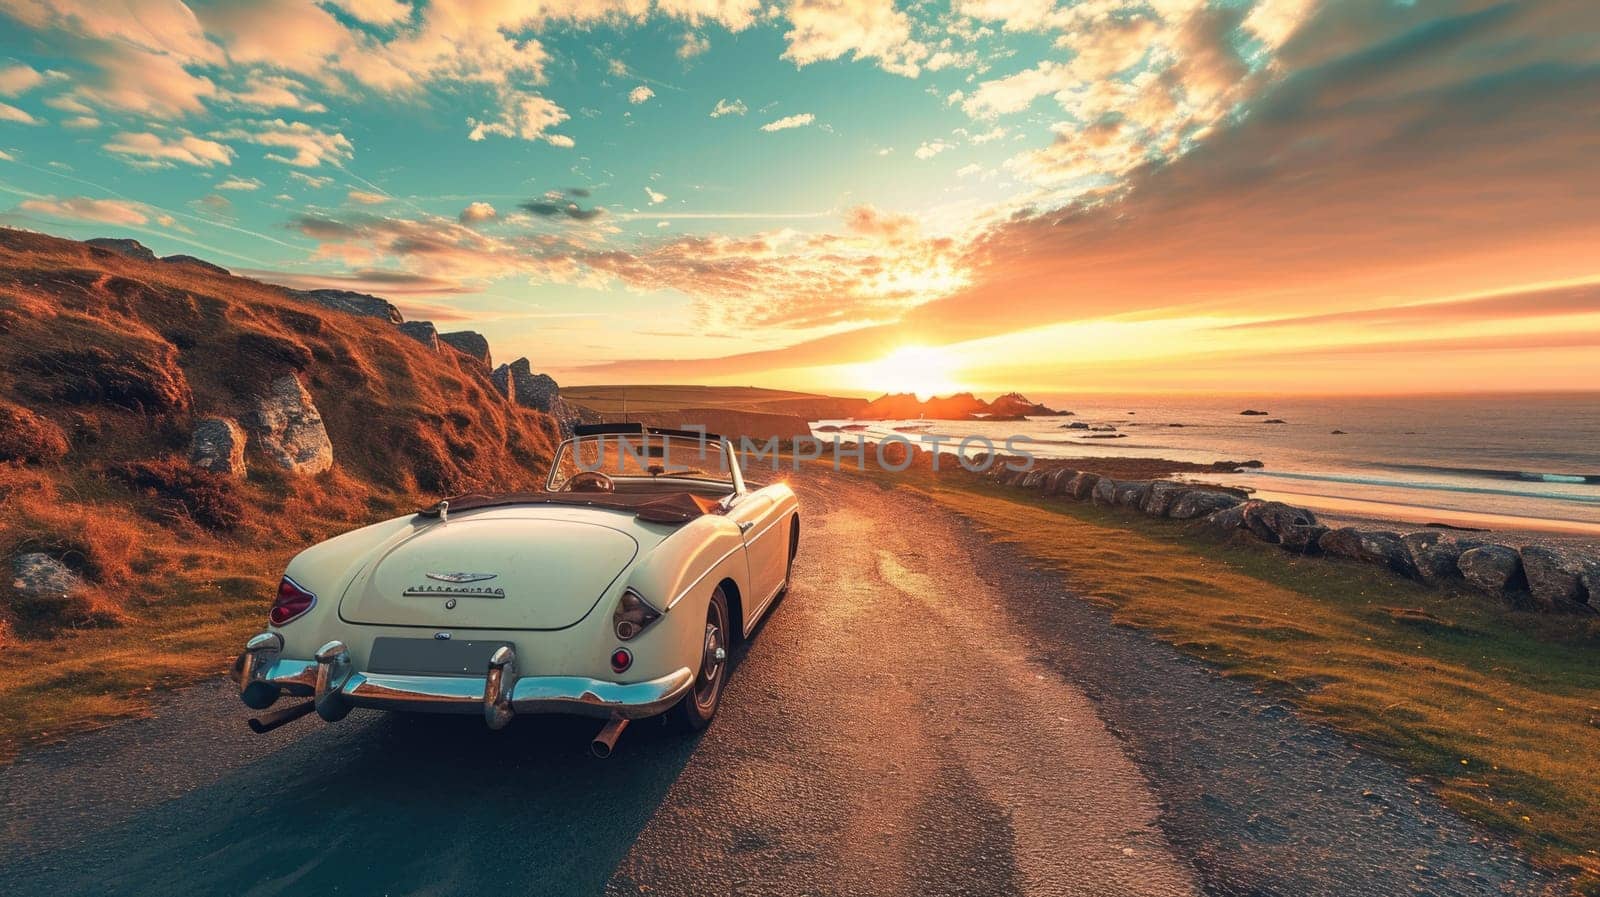 A vintage car parked on a winding coastal road overlooking the ocean, with a stunning sunset in the background creating a nostalgic scene. Resplendent.